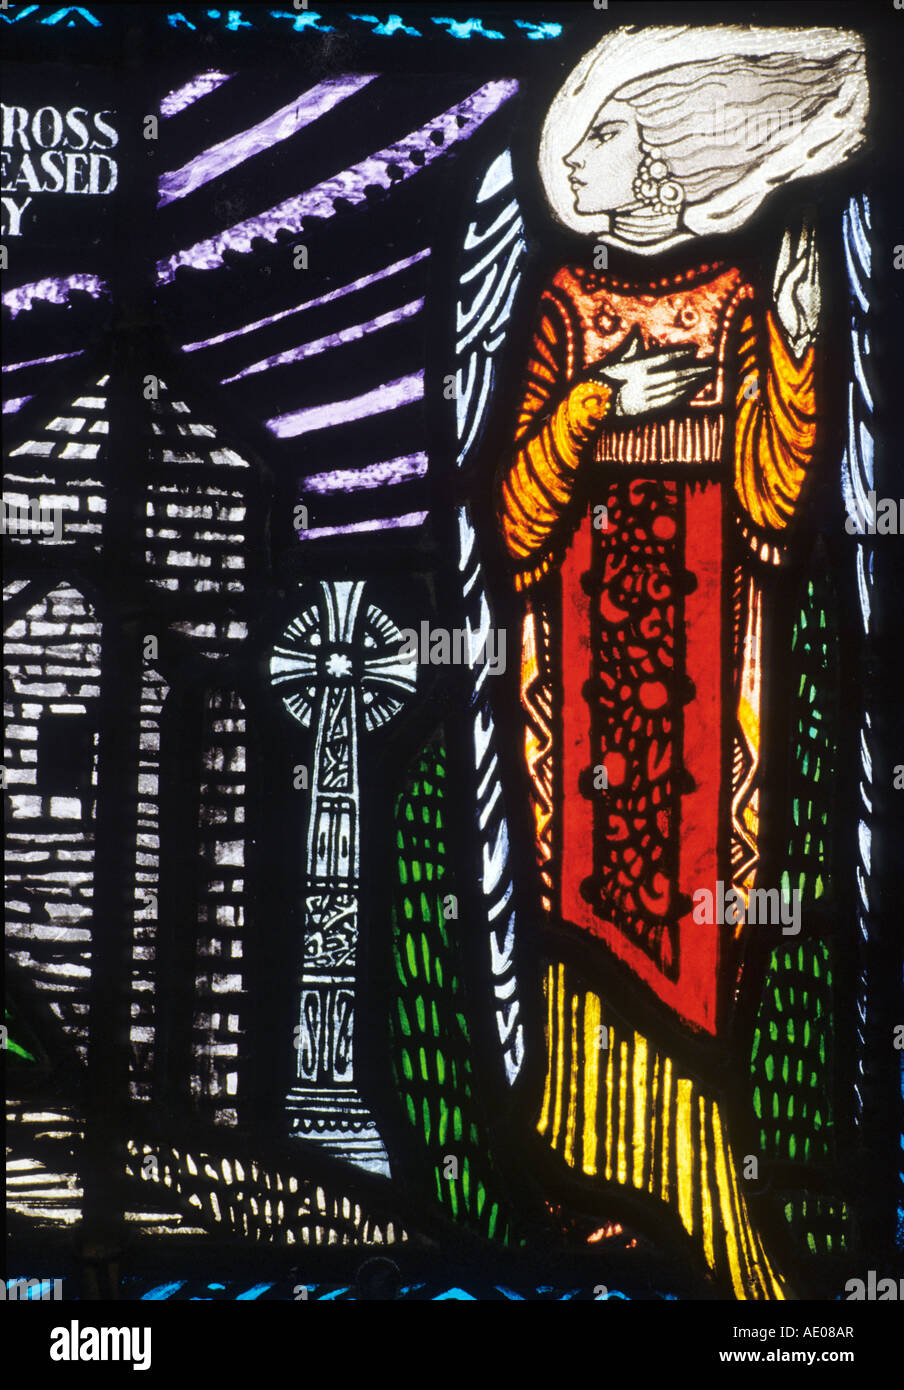 Stained Glass of St. Ceara, Carrickmacross Church, by Harry Clark Stock Photo